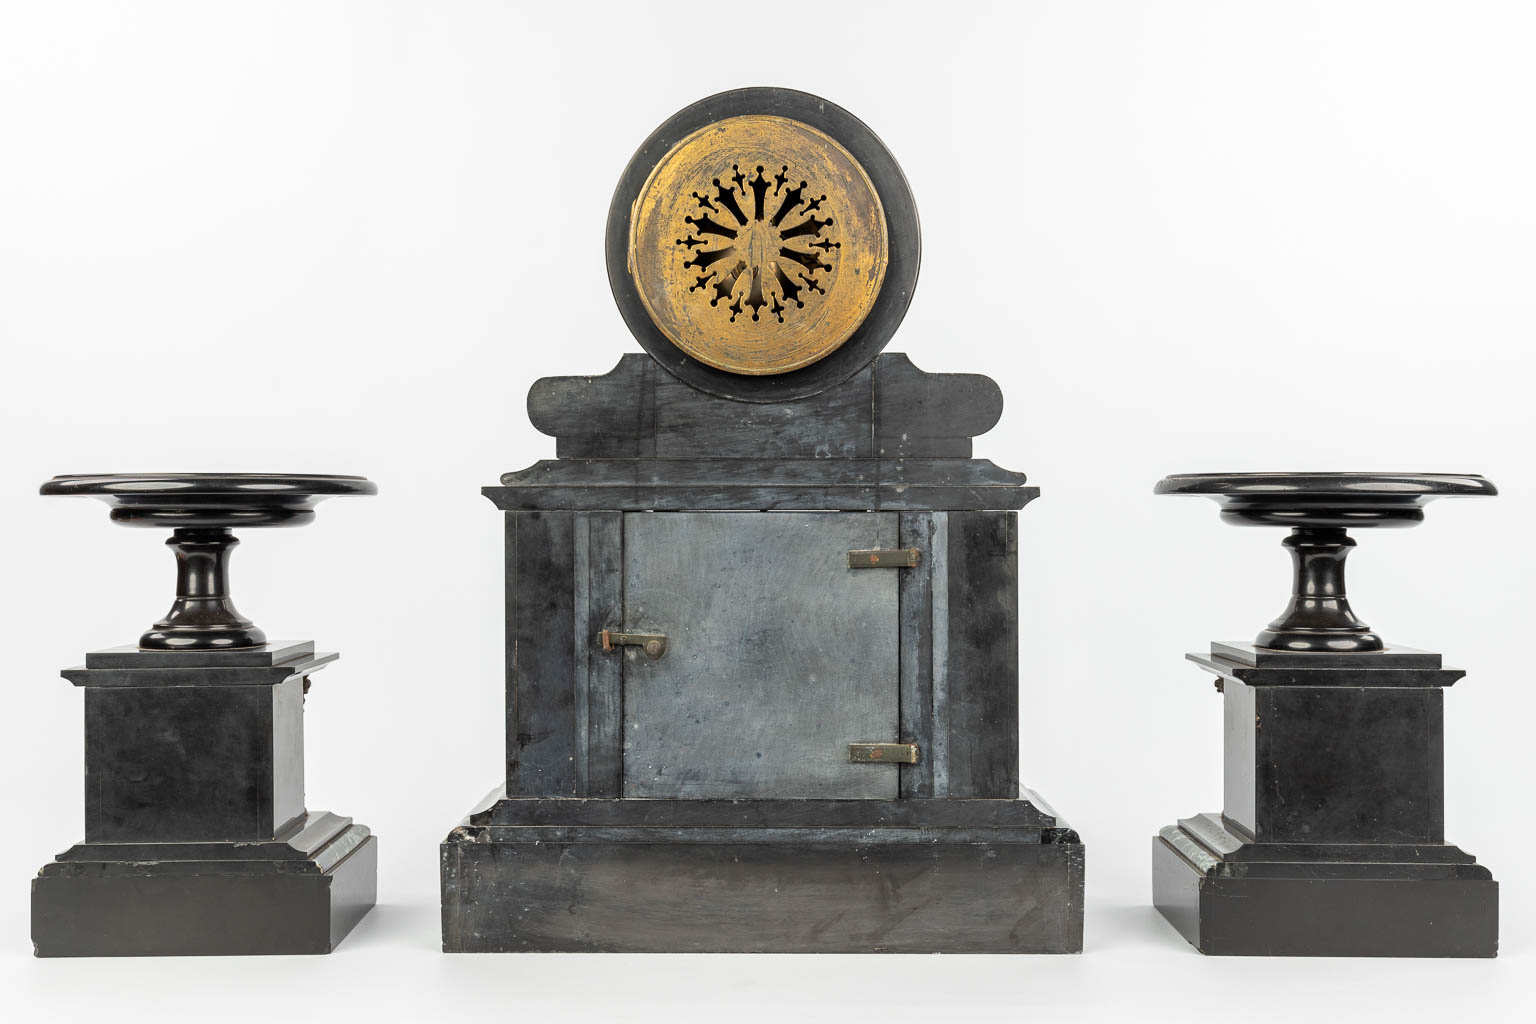 A three-piece garniture clock made of marble mounted with gilt bronze. (H:49cm)